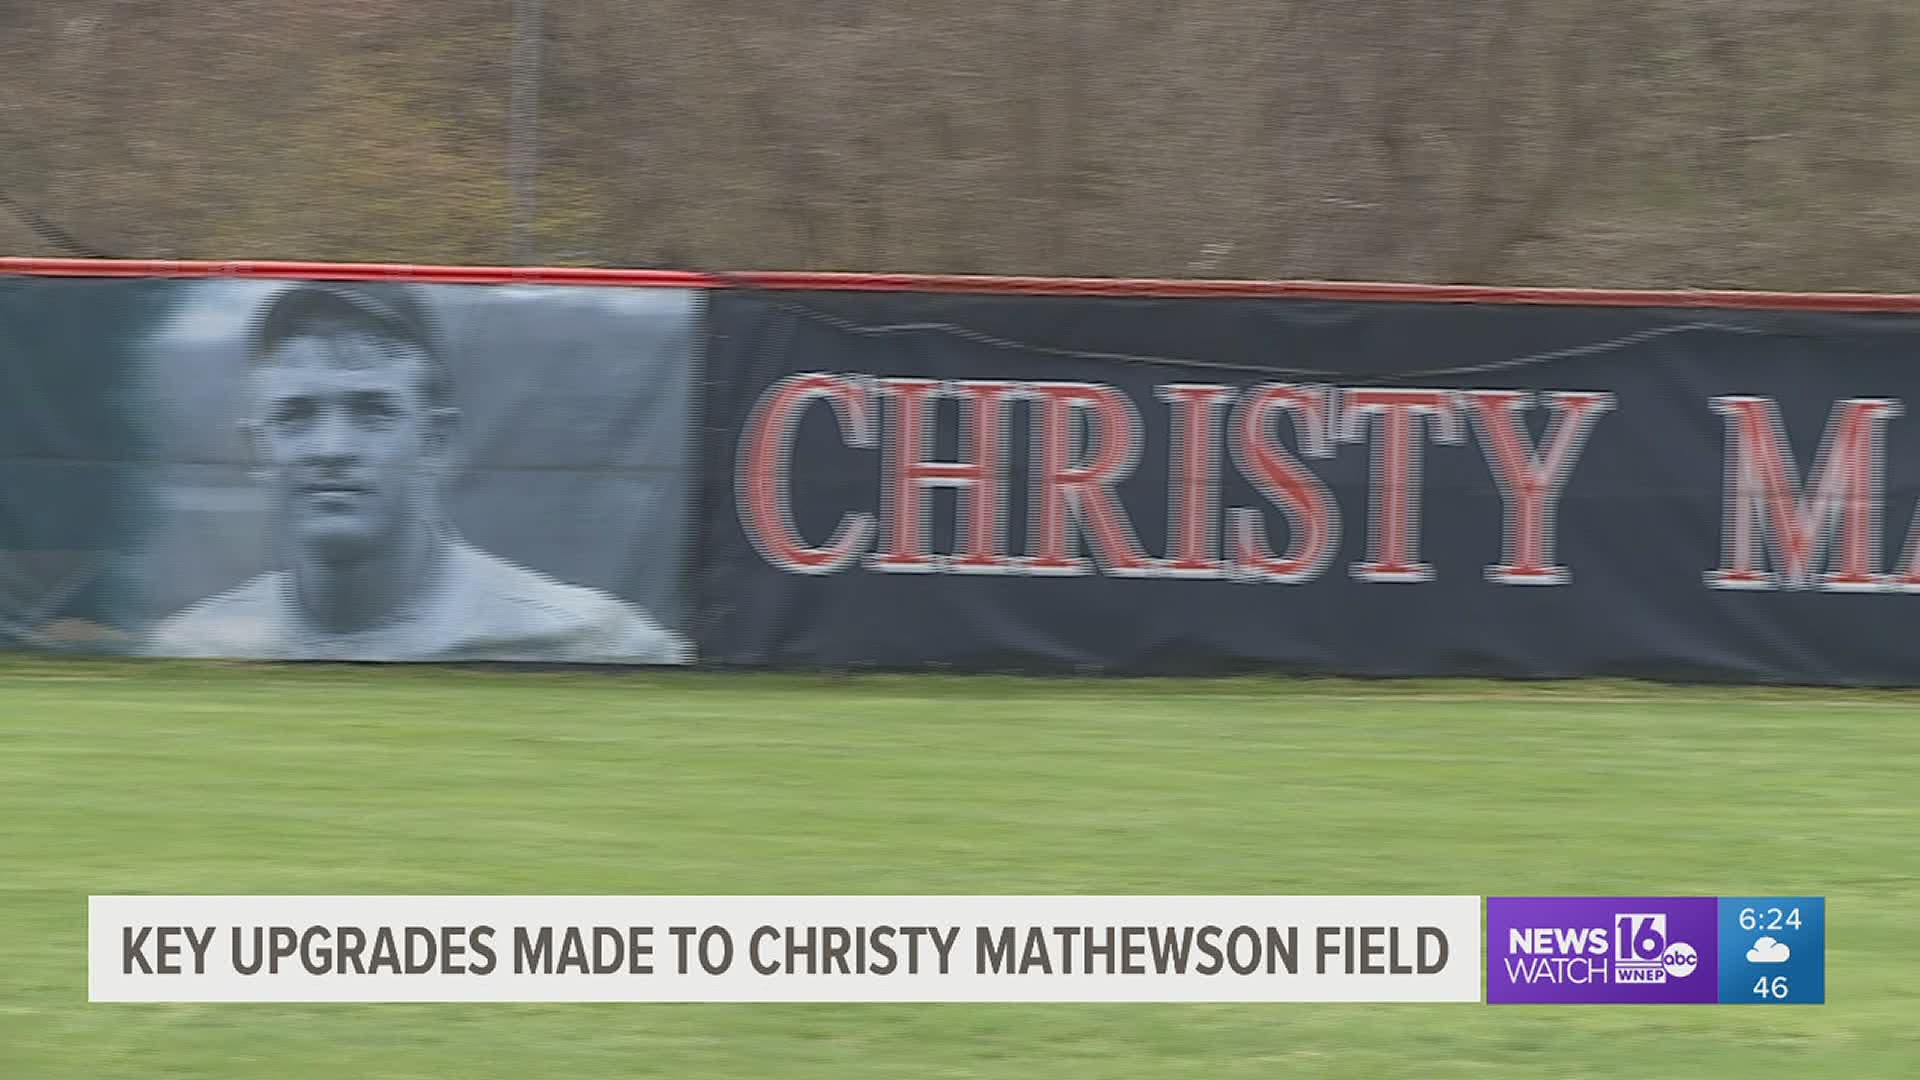 Keystone Off to Fast Start with Giant Upgrades Made to Christy Mathewson Field